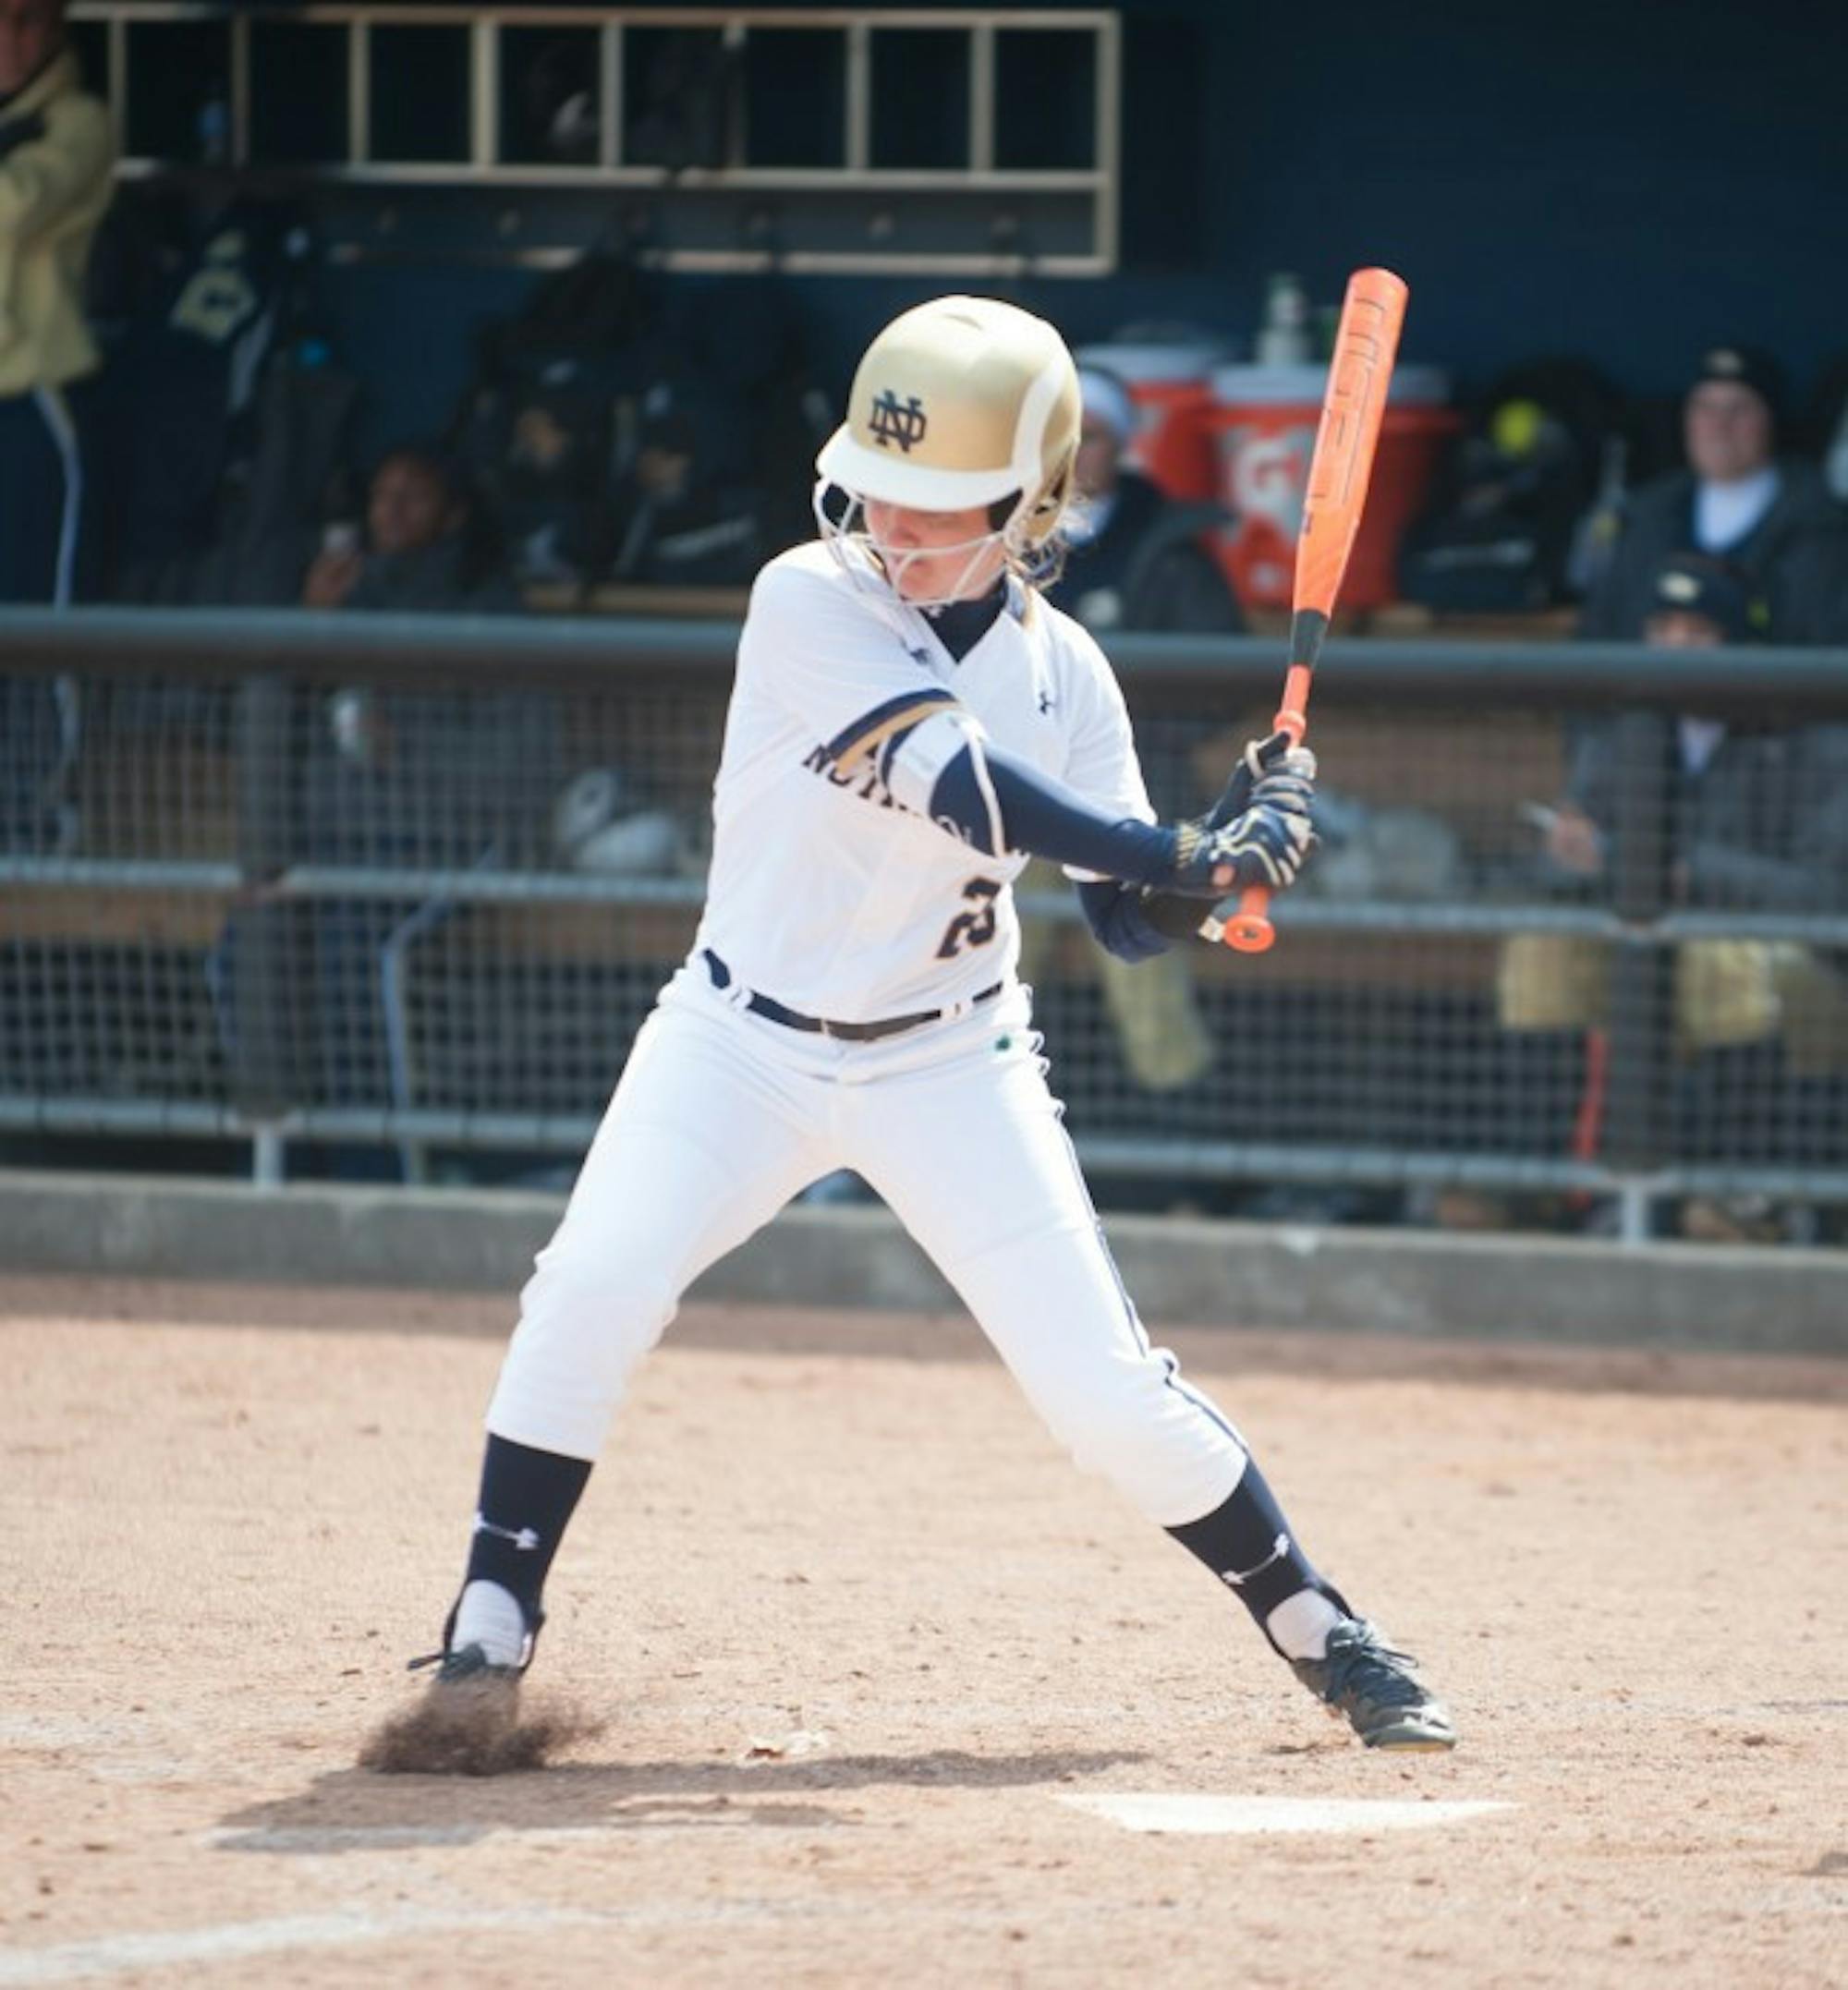 Freshman infielder Morgan Reed starts her swing in a 13-0 win over Georgia Tech on March 21 at Melissa Cook Stadium.